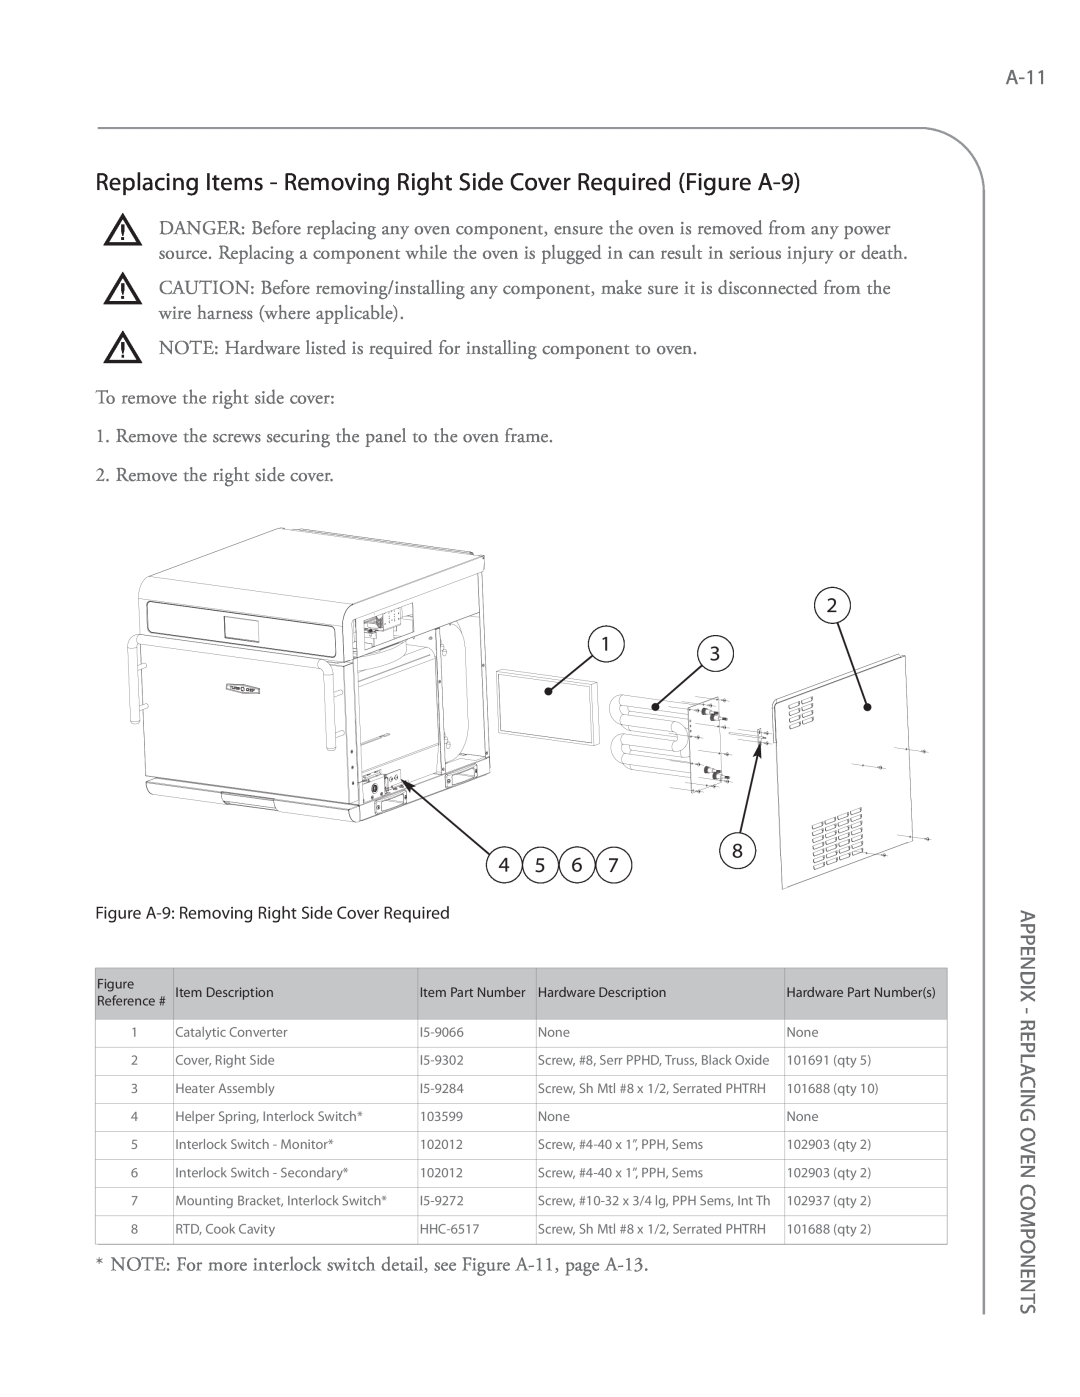 Turbo Chef Technologies i5 service manual Replacing Items - Removing Right Side Cover Required Figure A-9, A-11 